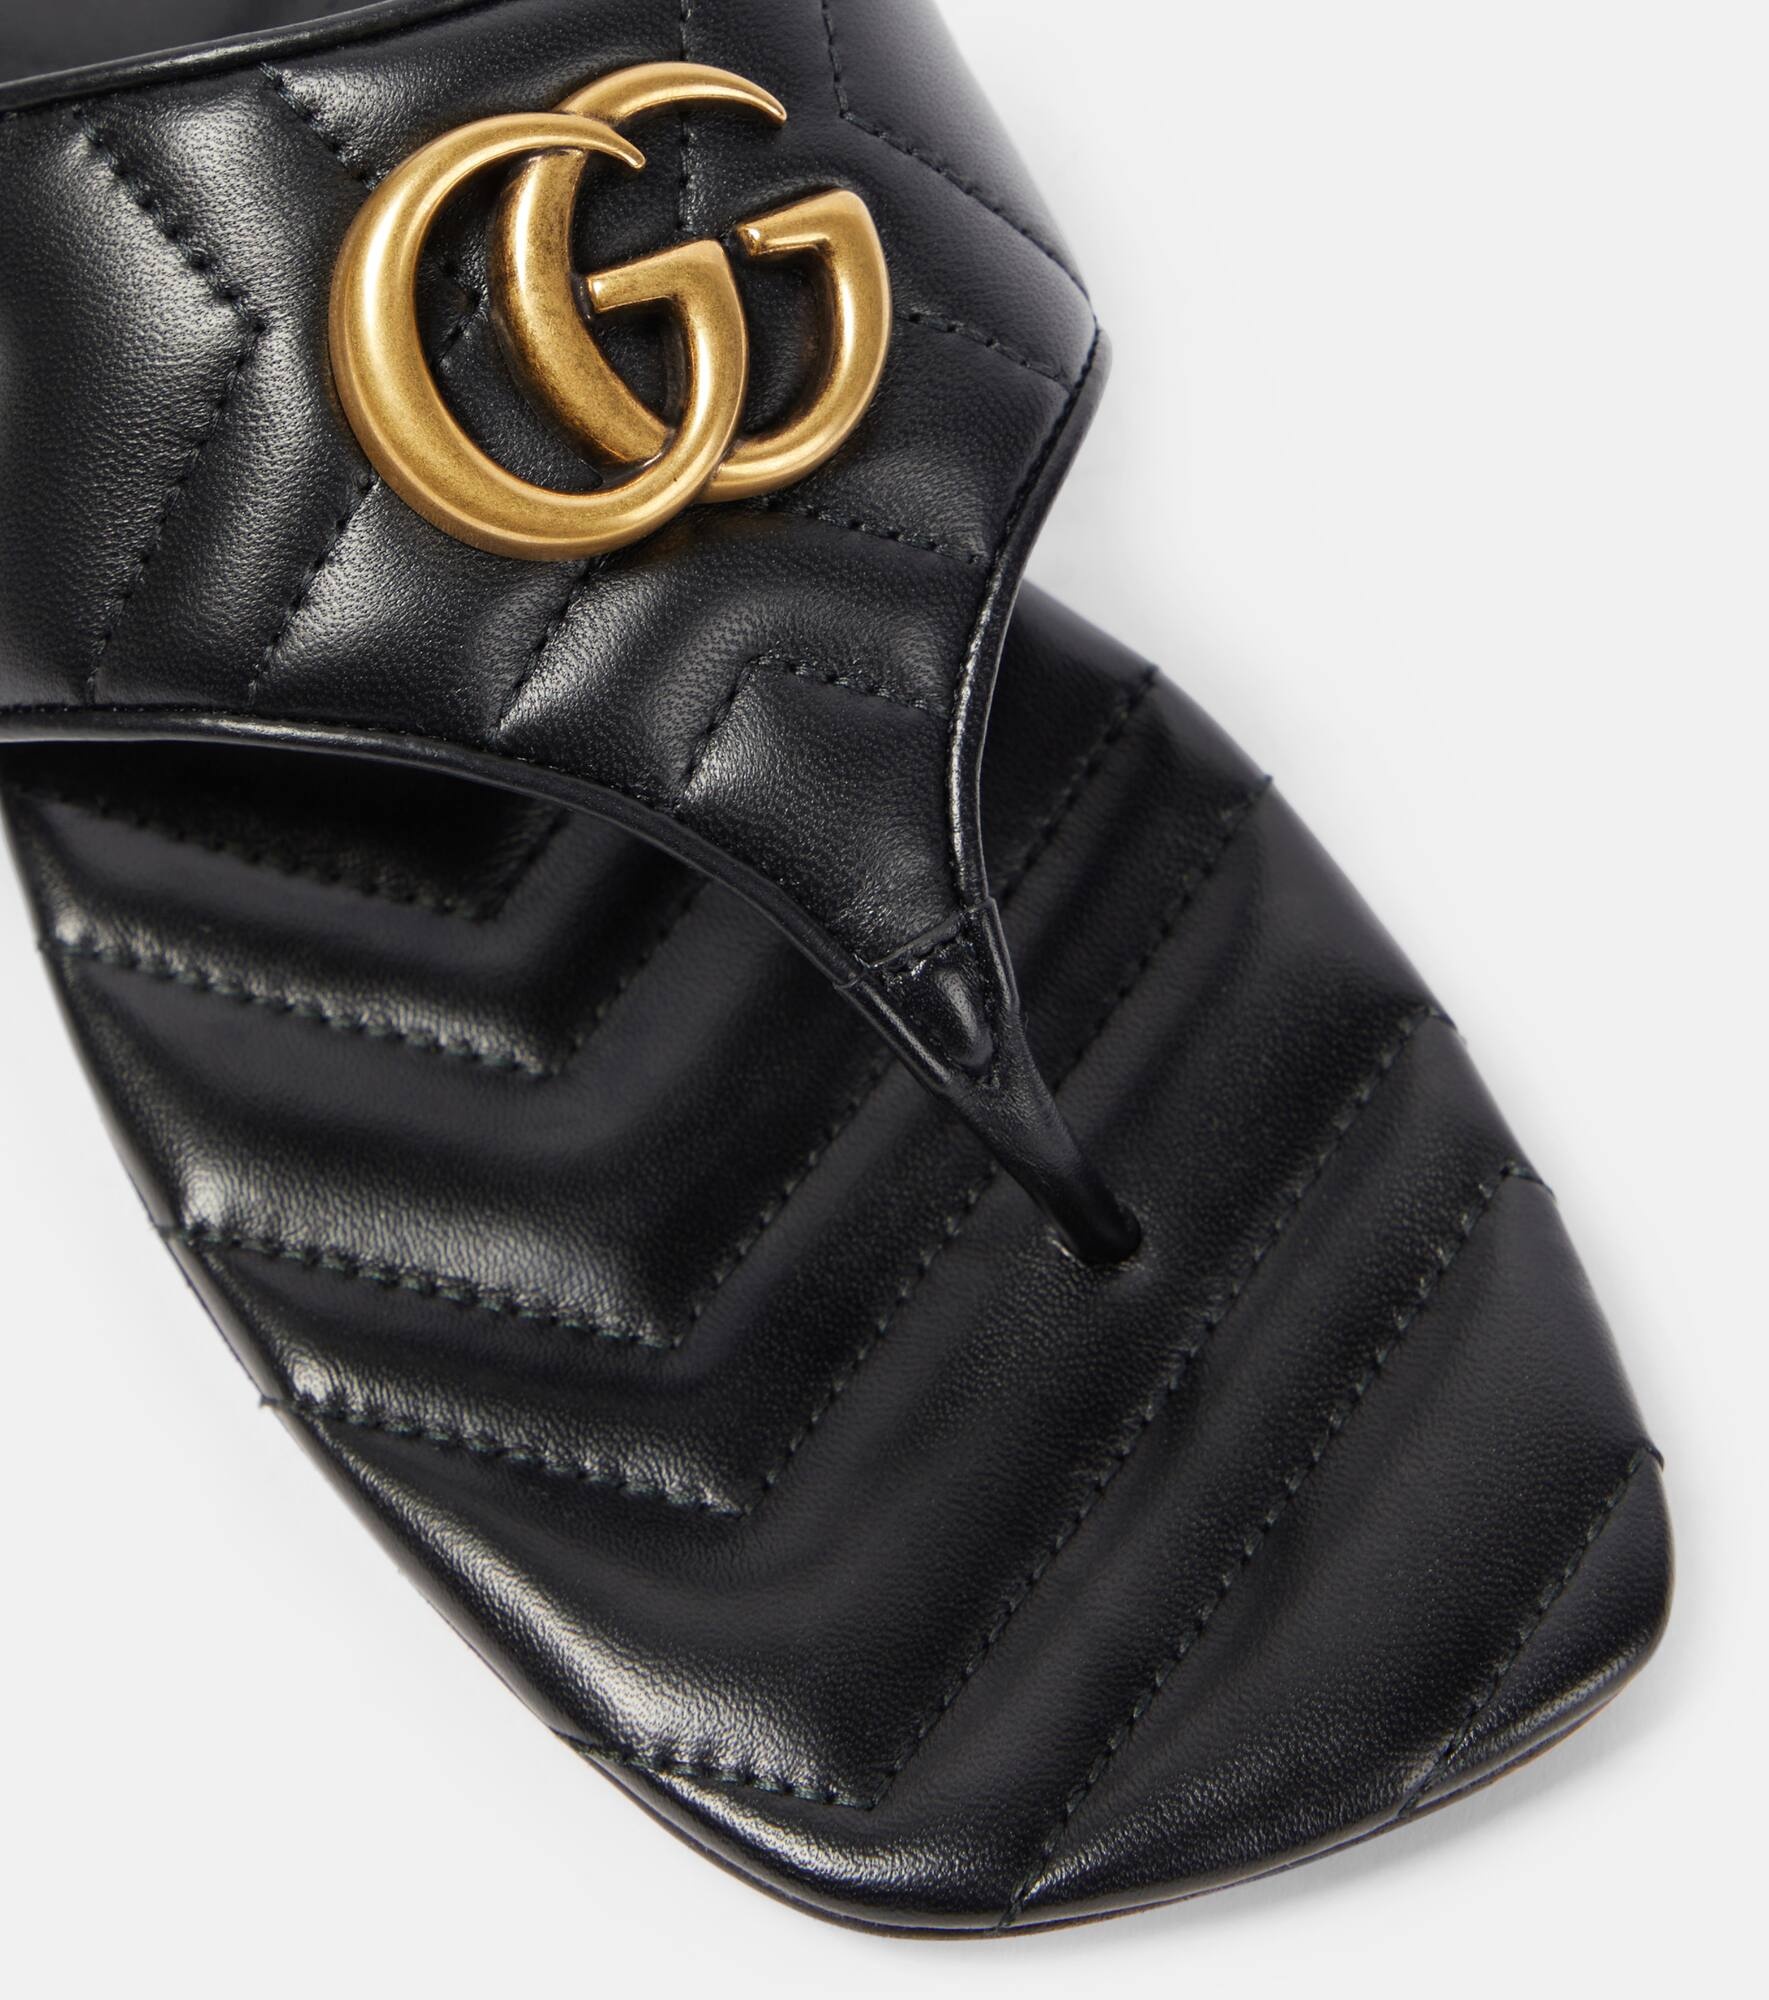 GG Marmont leather thong sandals - 4